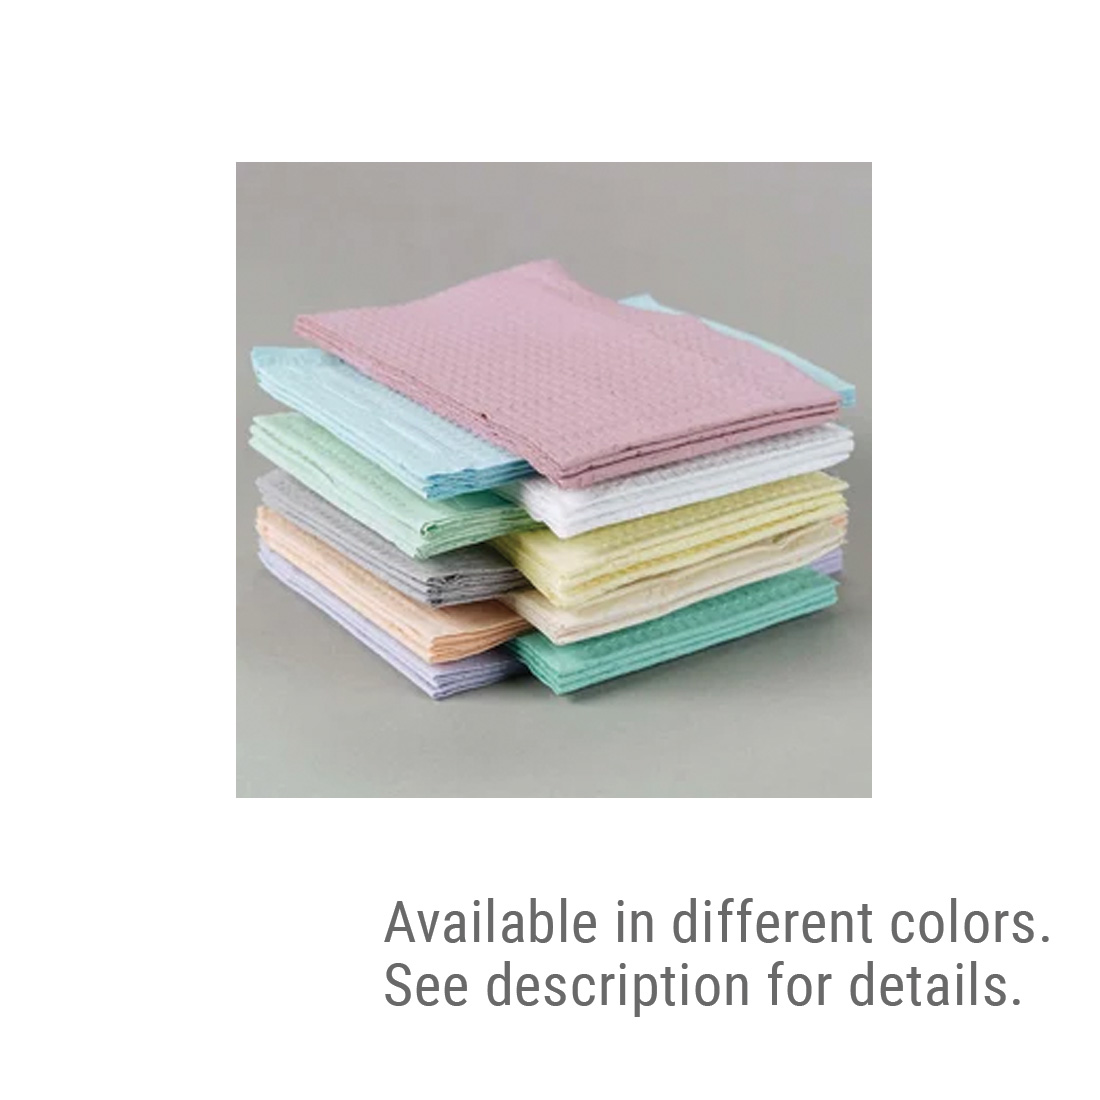 Patient Towel Tissue/Poly 13" x 18" 2-Ply Gray - 500/Case